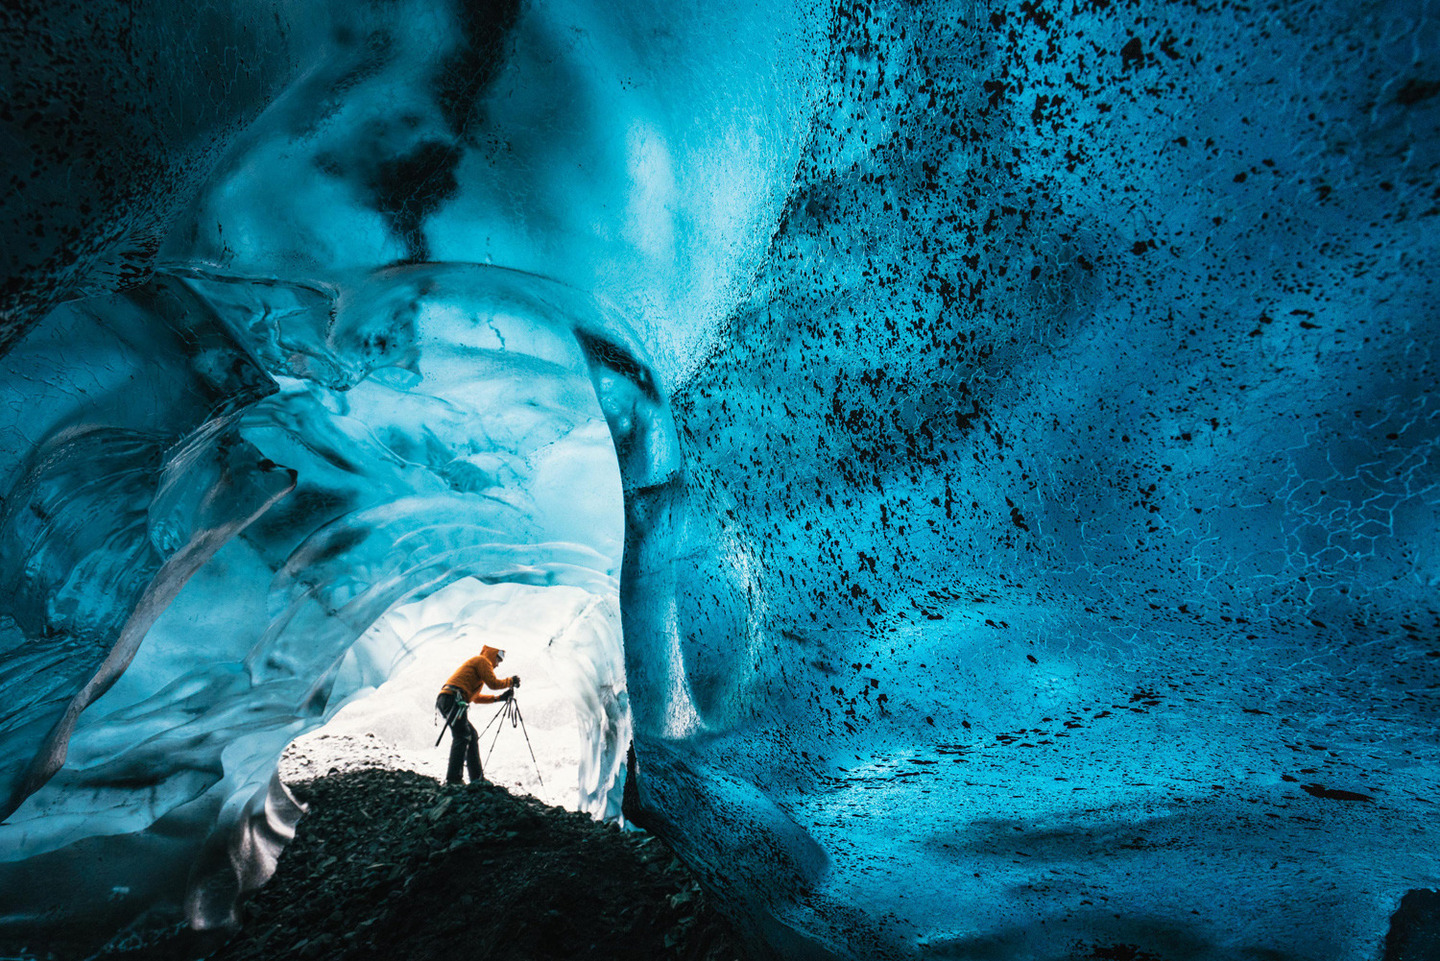 The inside of Iceland’s glaciers looks like another planet